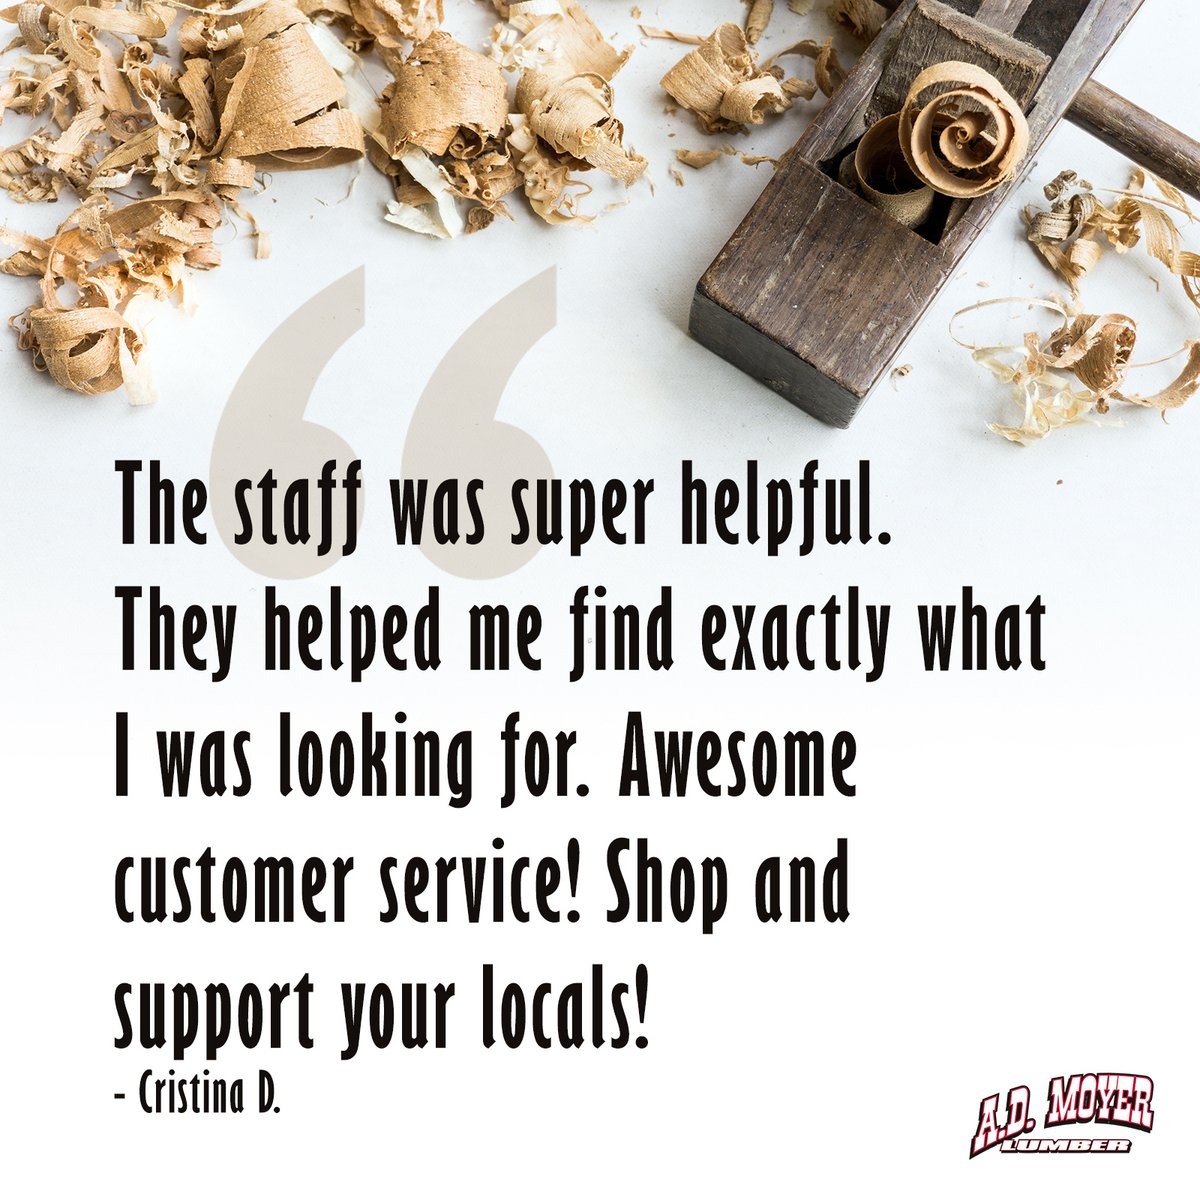 We are extremely grateful to our kind customers who take the time to leave comments online. We sincerely and humbly thank you and assure you that we are committed to continually working hard daily to earn your business. 
#testimonial #shoplocal #keepitlocal